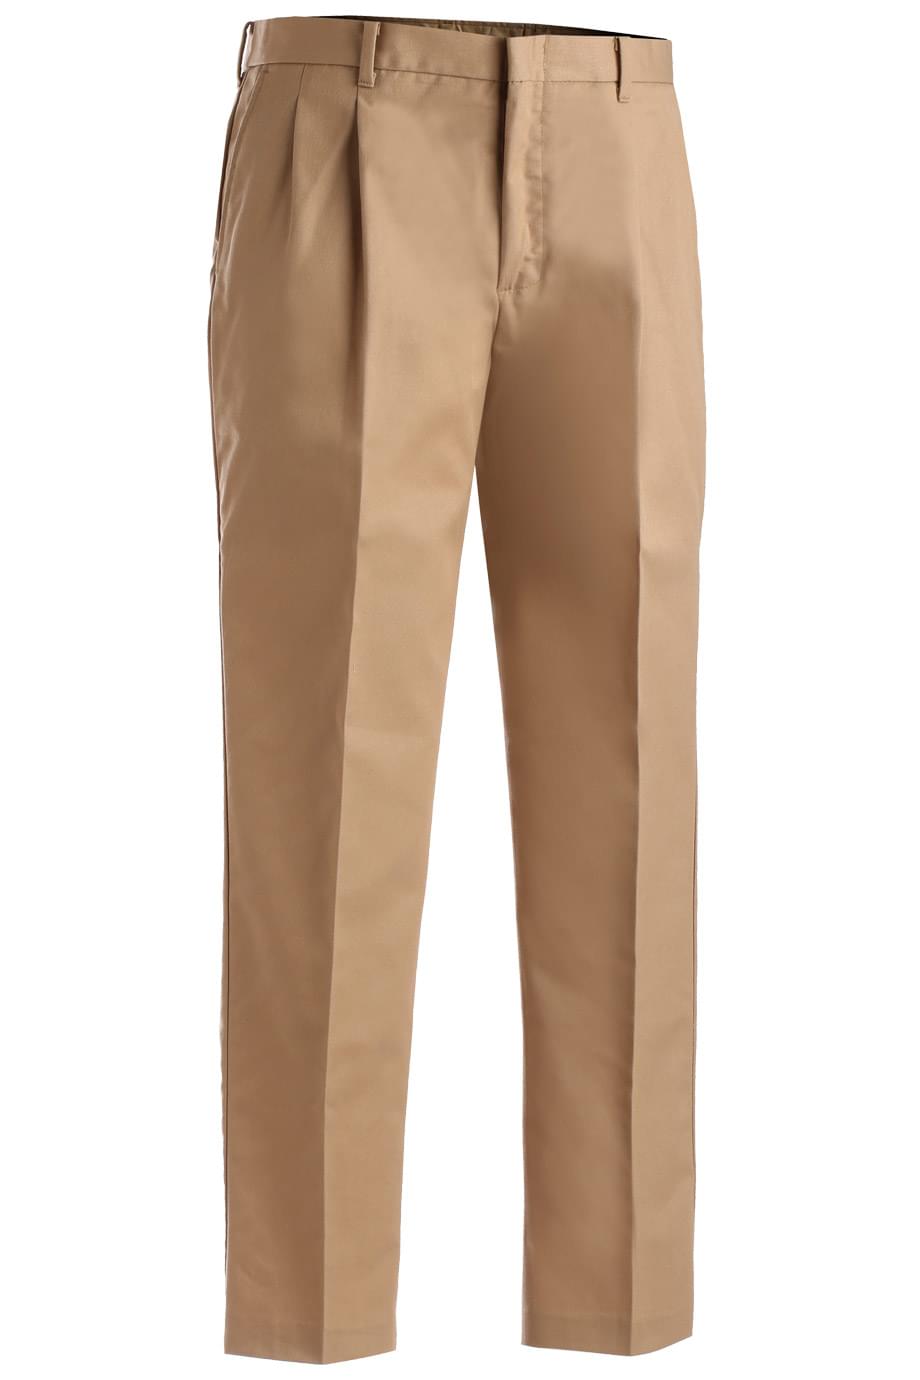 Edwards 2610  MENS BUSINESS CASUAL PLEATED CHINO PANT